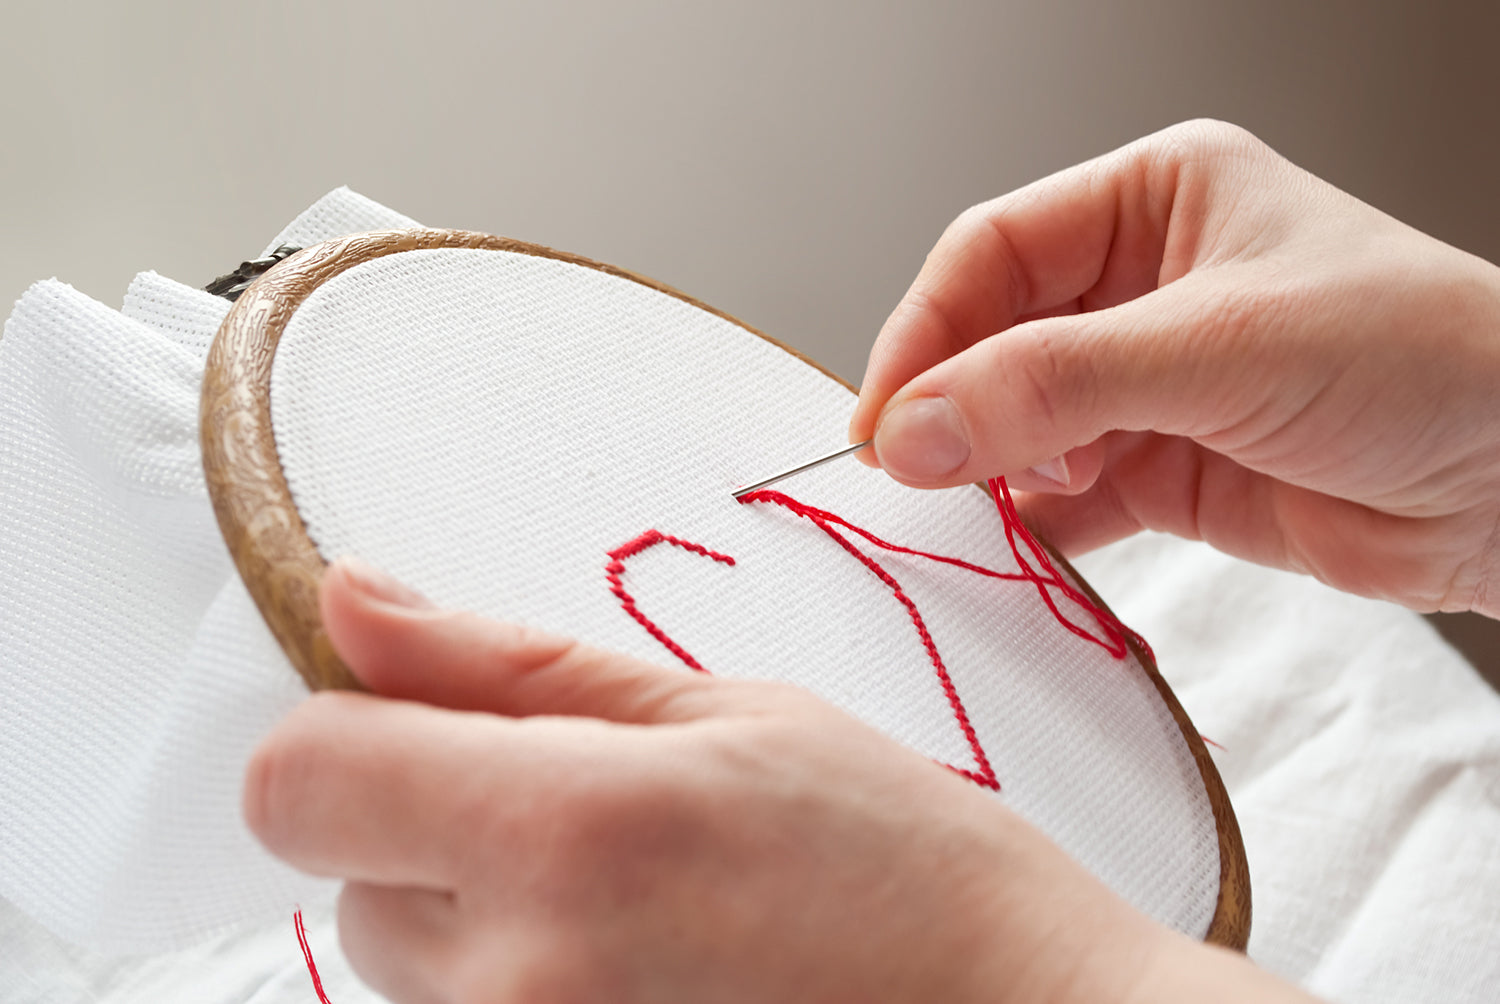 common embroidery mistakes and how to avoid them